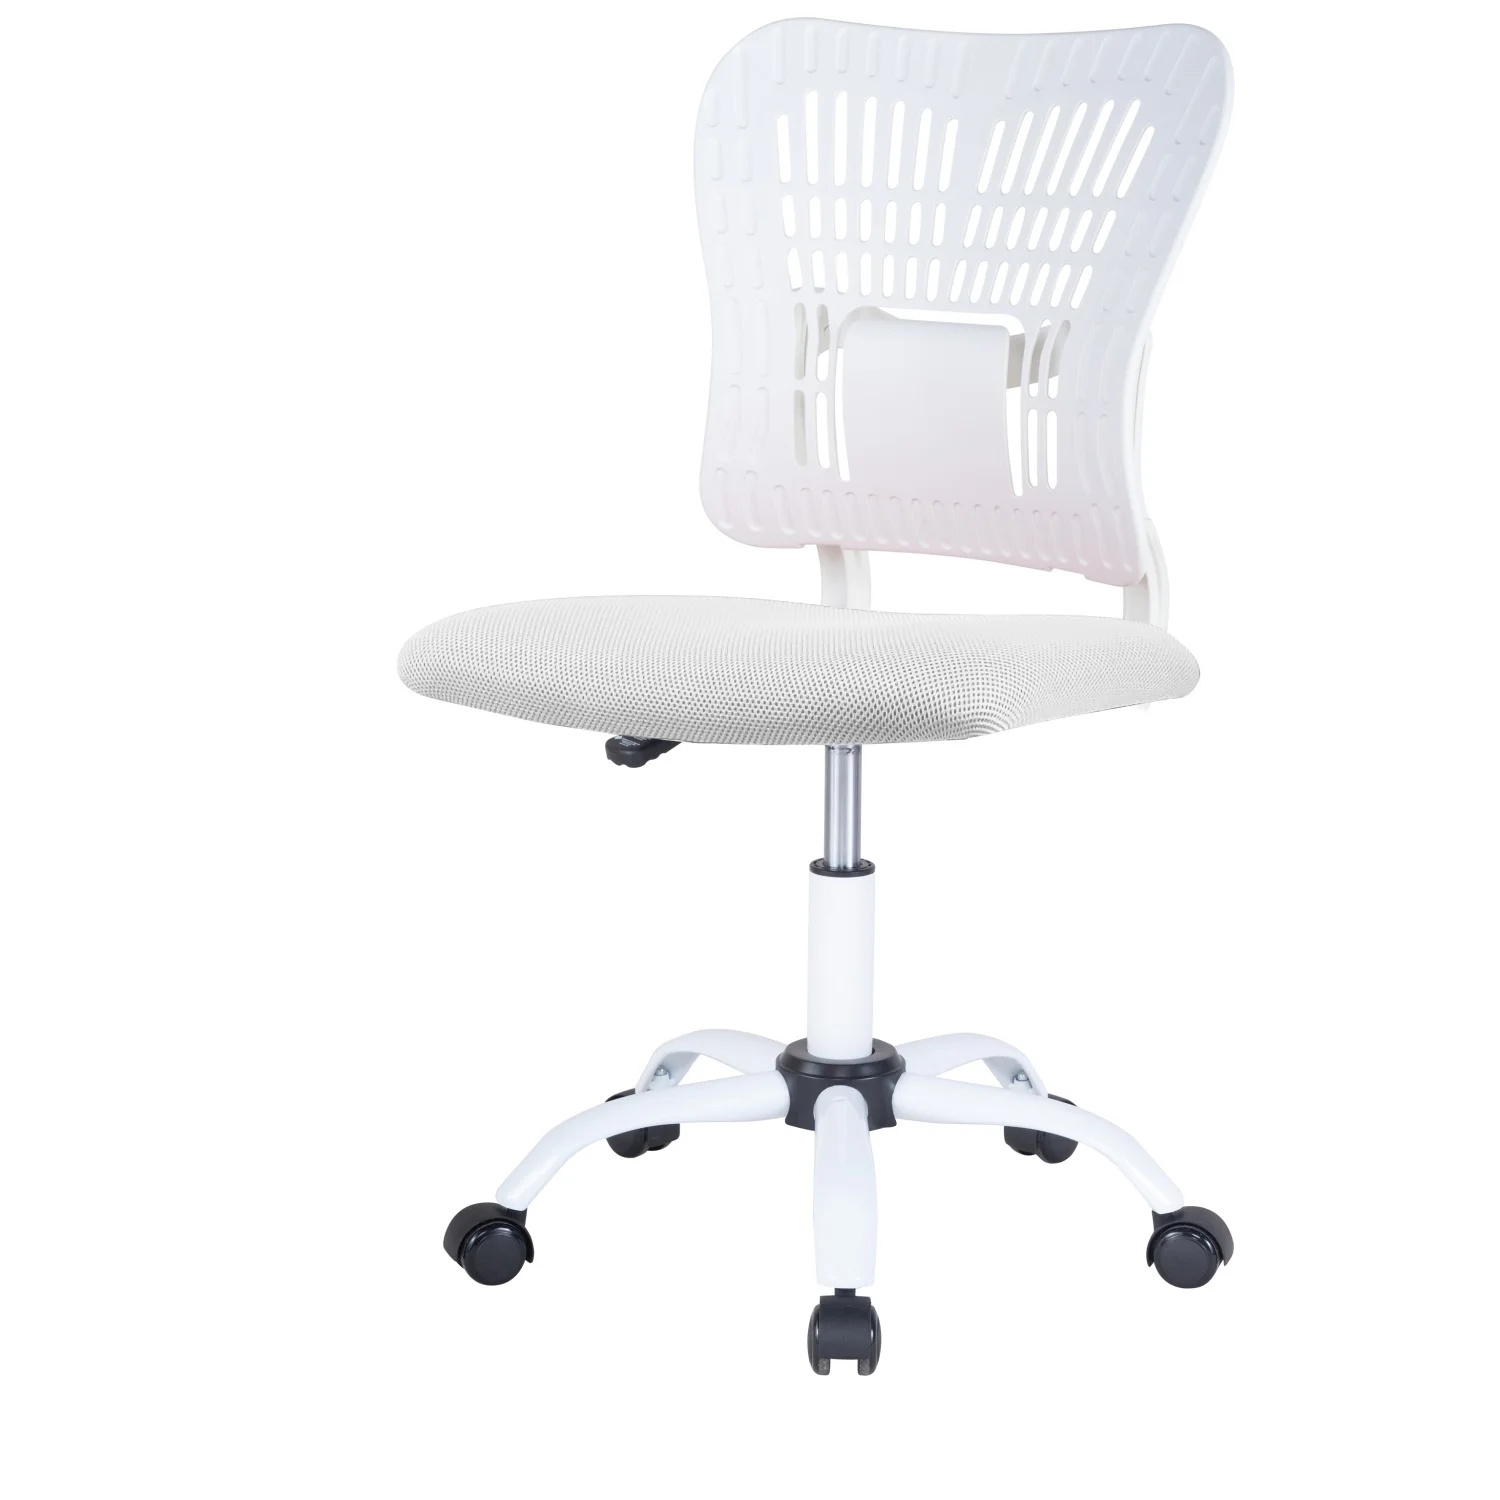 

Ergonomic White Mesh Home Office Chair with Adjustable Height, 360° Swivel, and Armless Design - Comfortable Desk Chair for Com